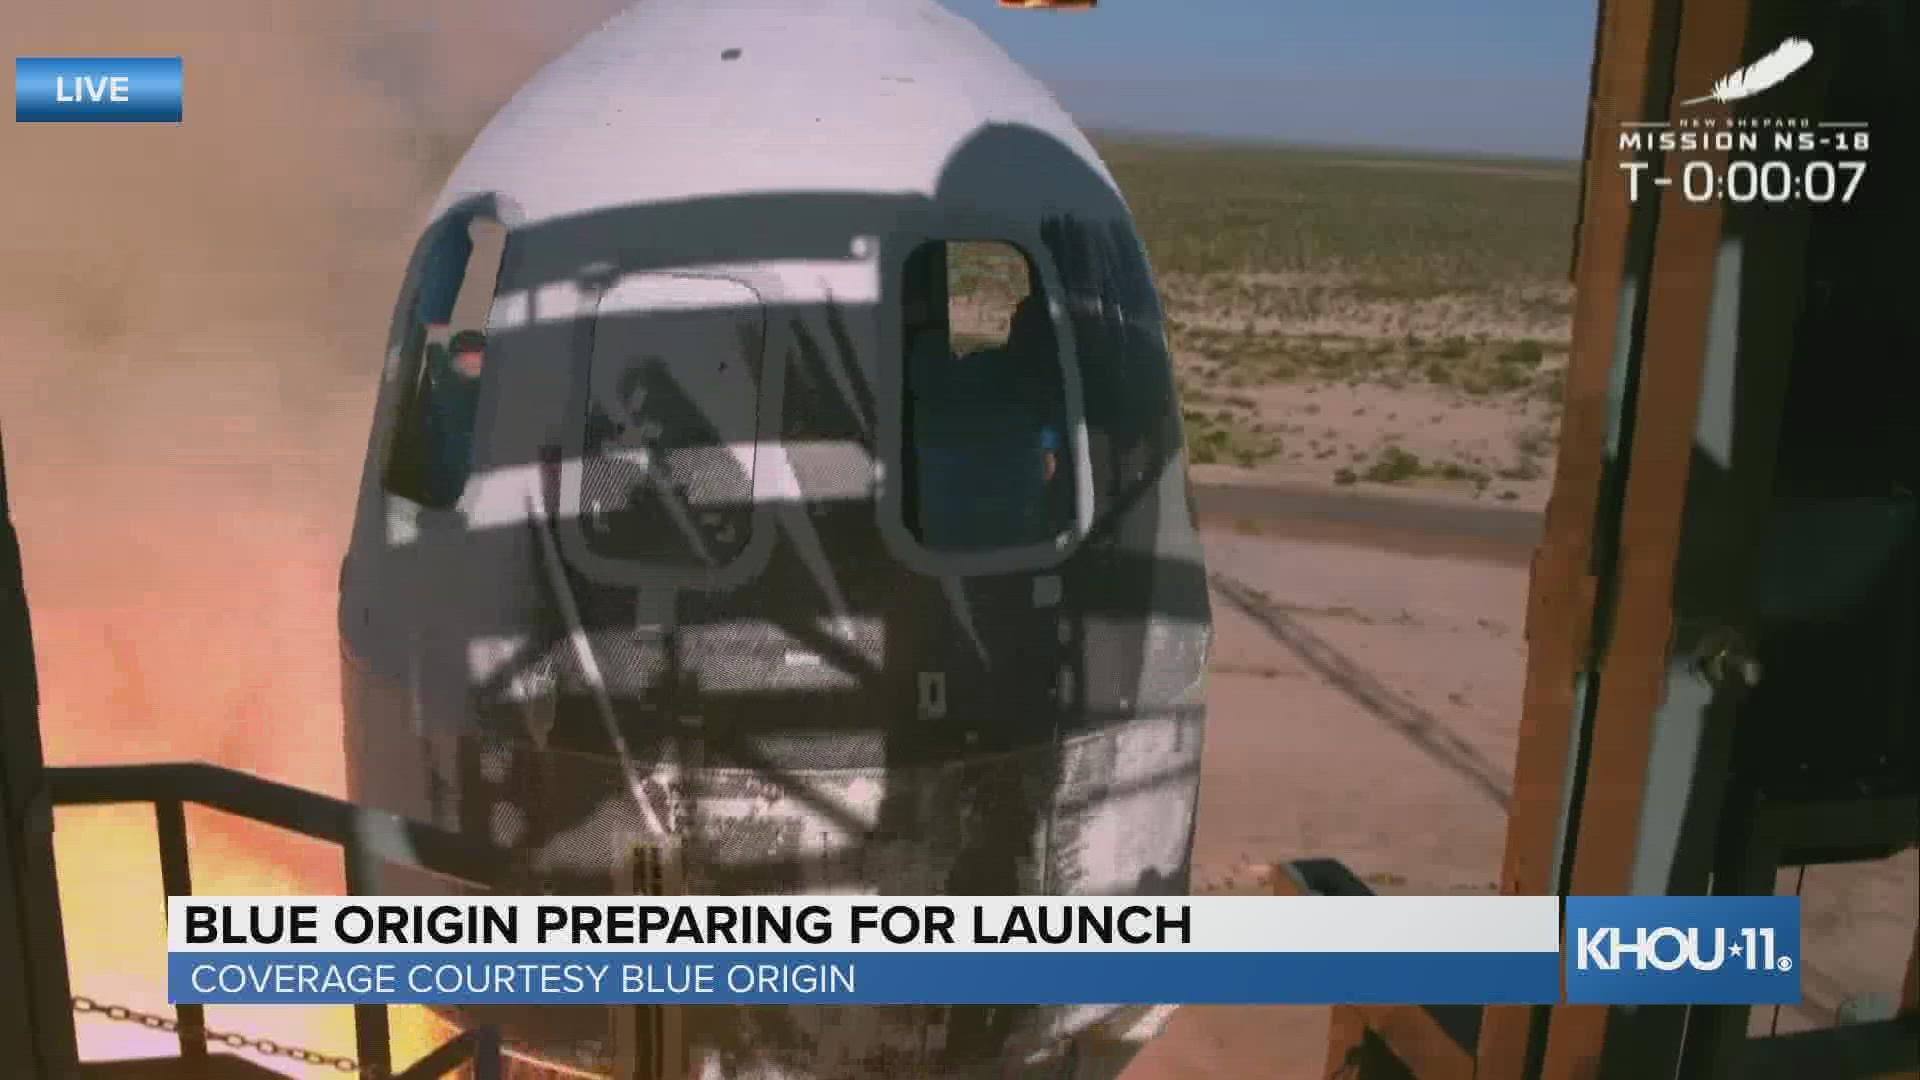 Blue Origin second manned space launch with William Schatner onboard was a success Wednesday.